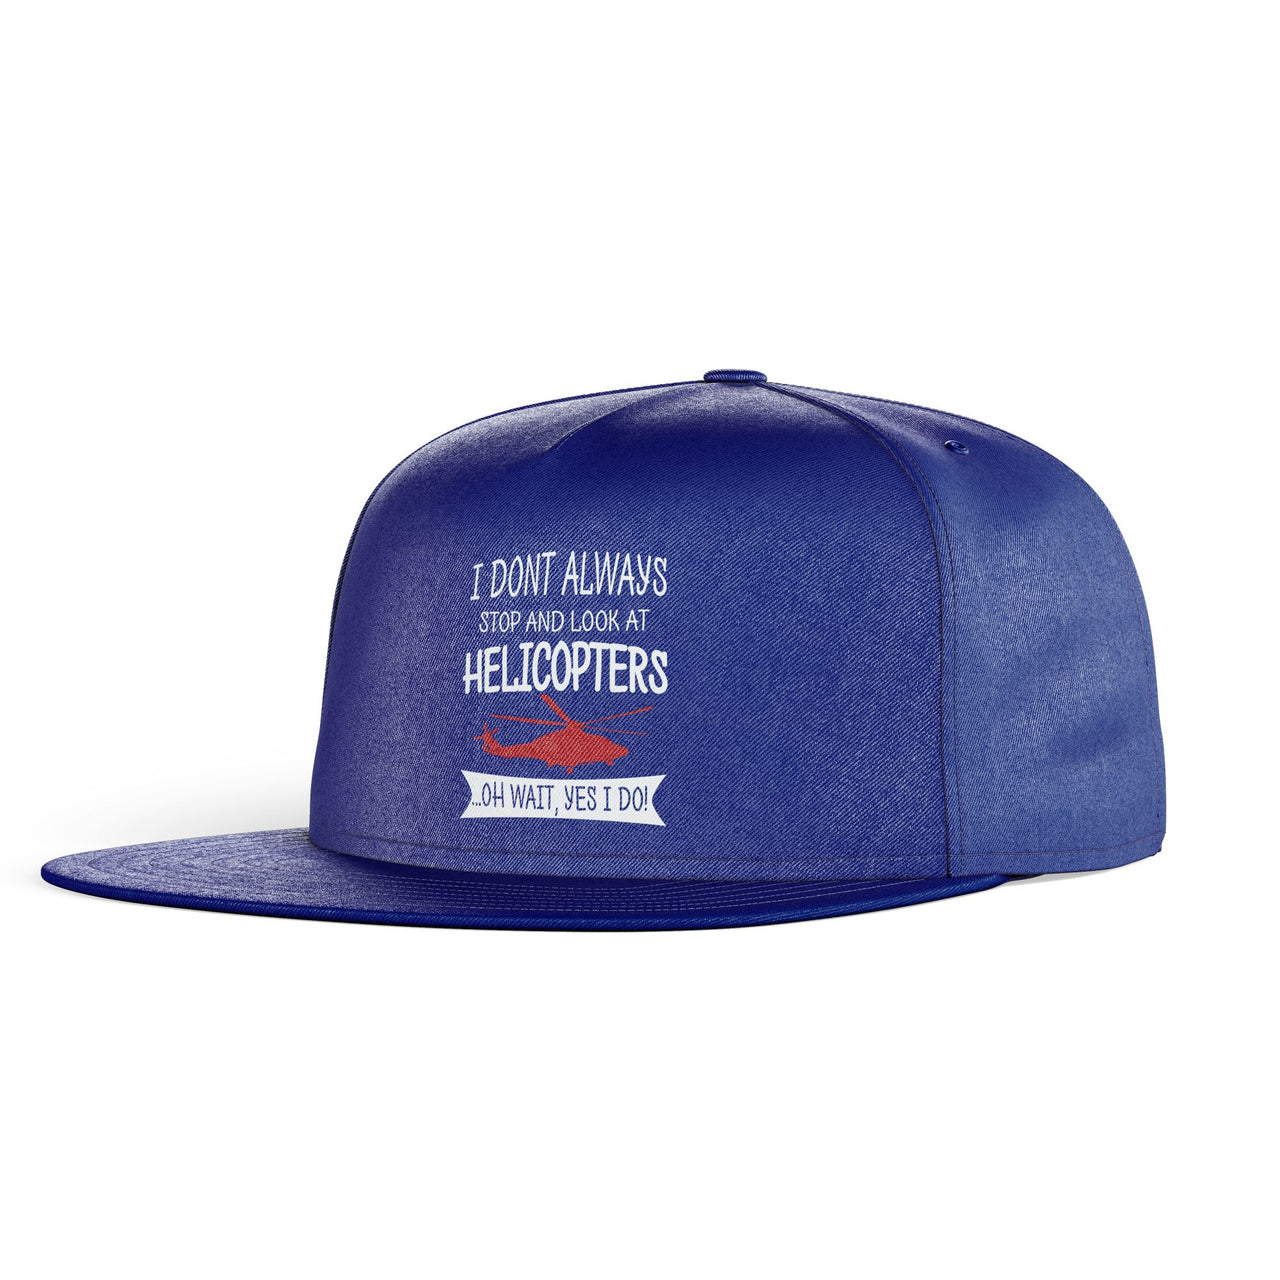 I Don't Always Stop and Look at Helicopters Designed Snapback Caps & Hats